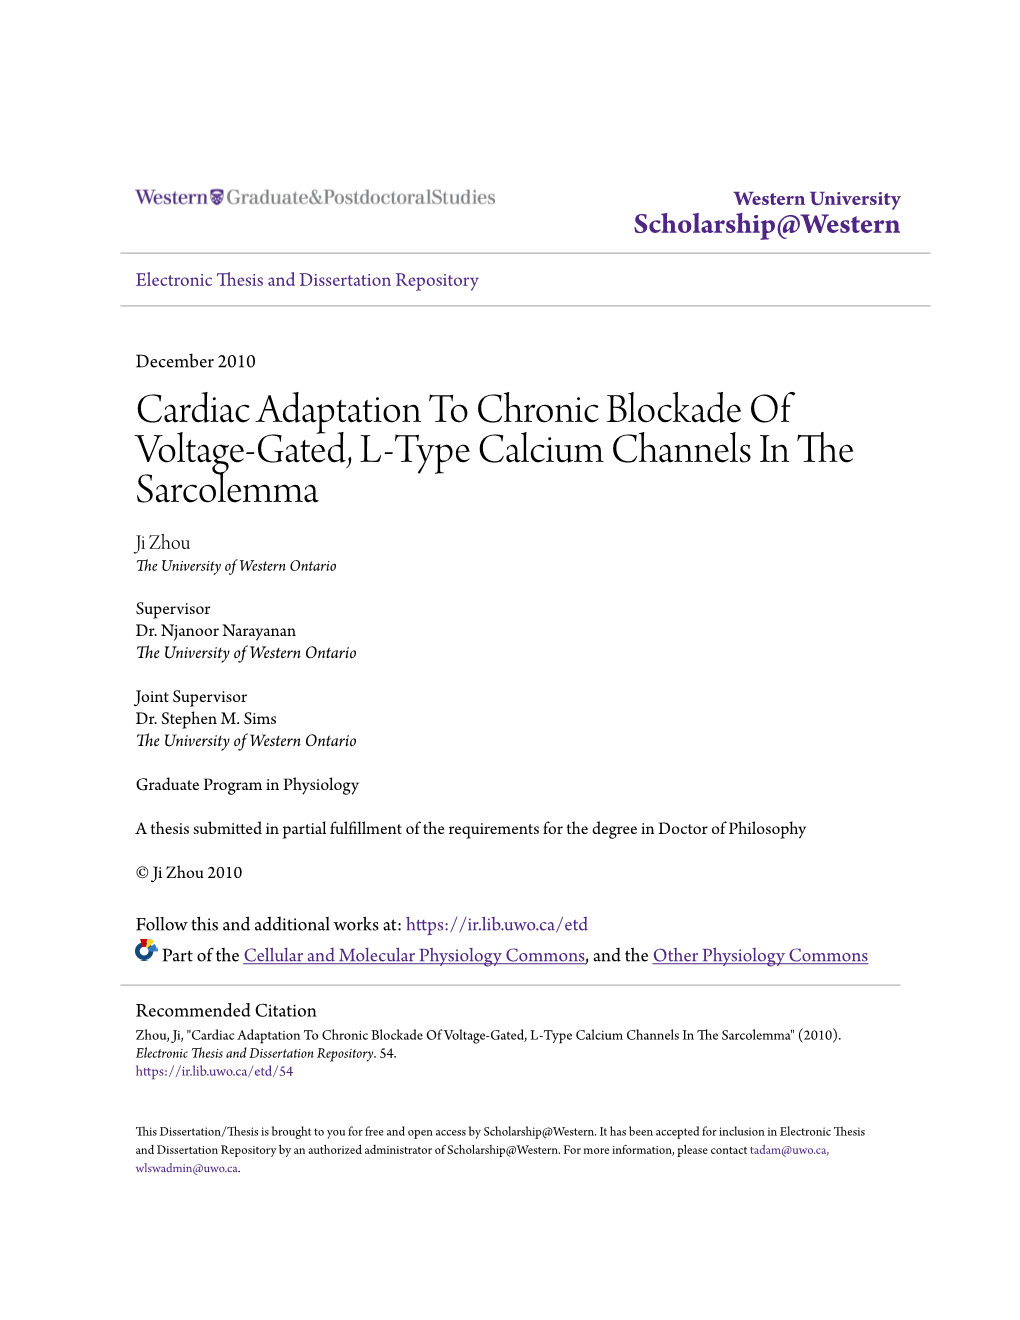 Cardiac Adaptation to Chronic Blockade of Voltage-Gated, L-Type Calcium Channels in the Sarcolemma Ji Zhou the University of Western Ontario